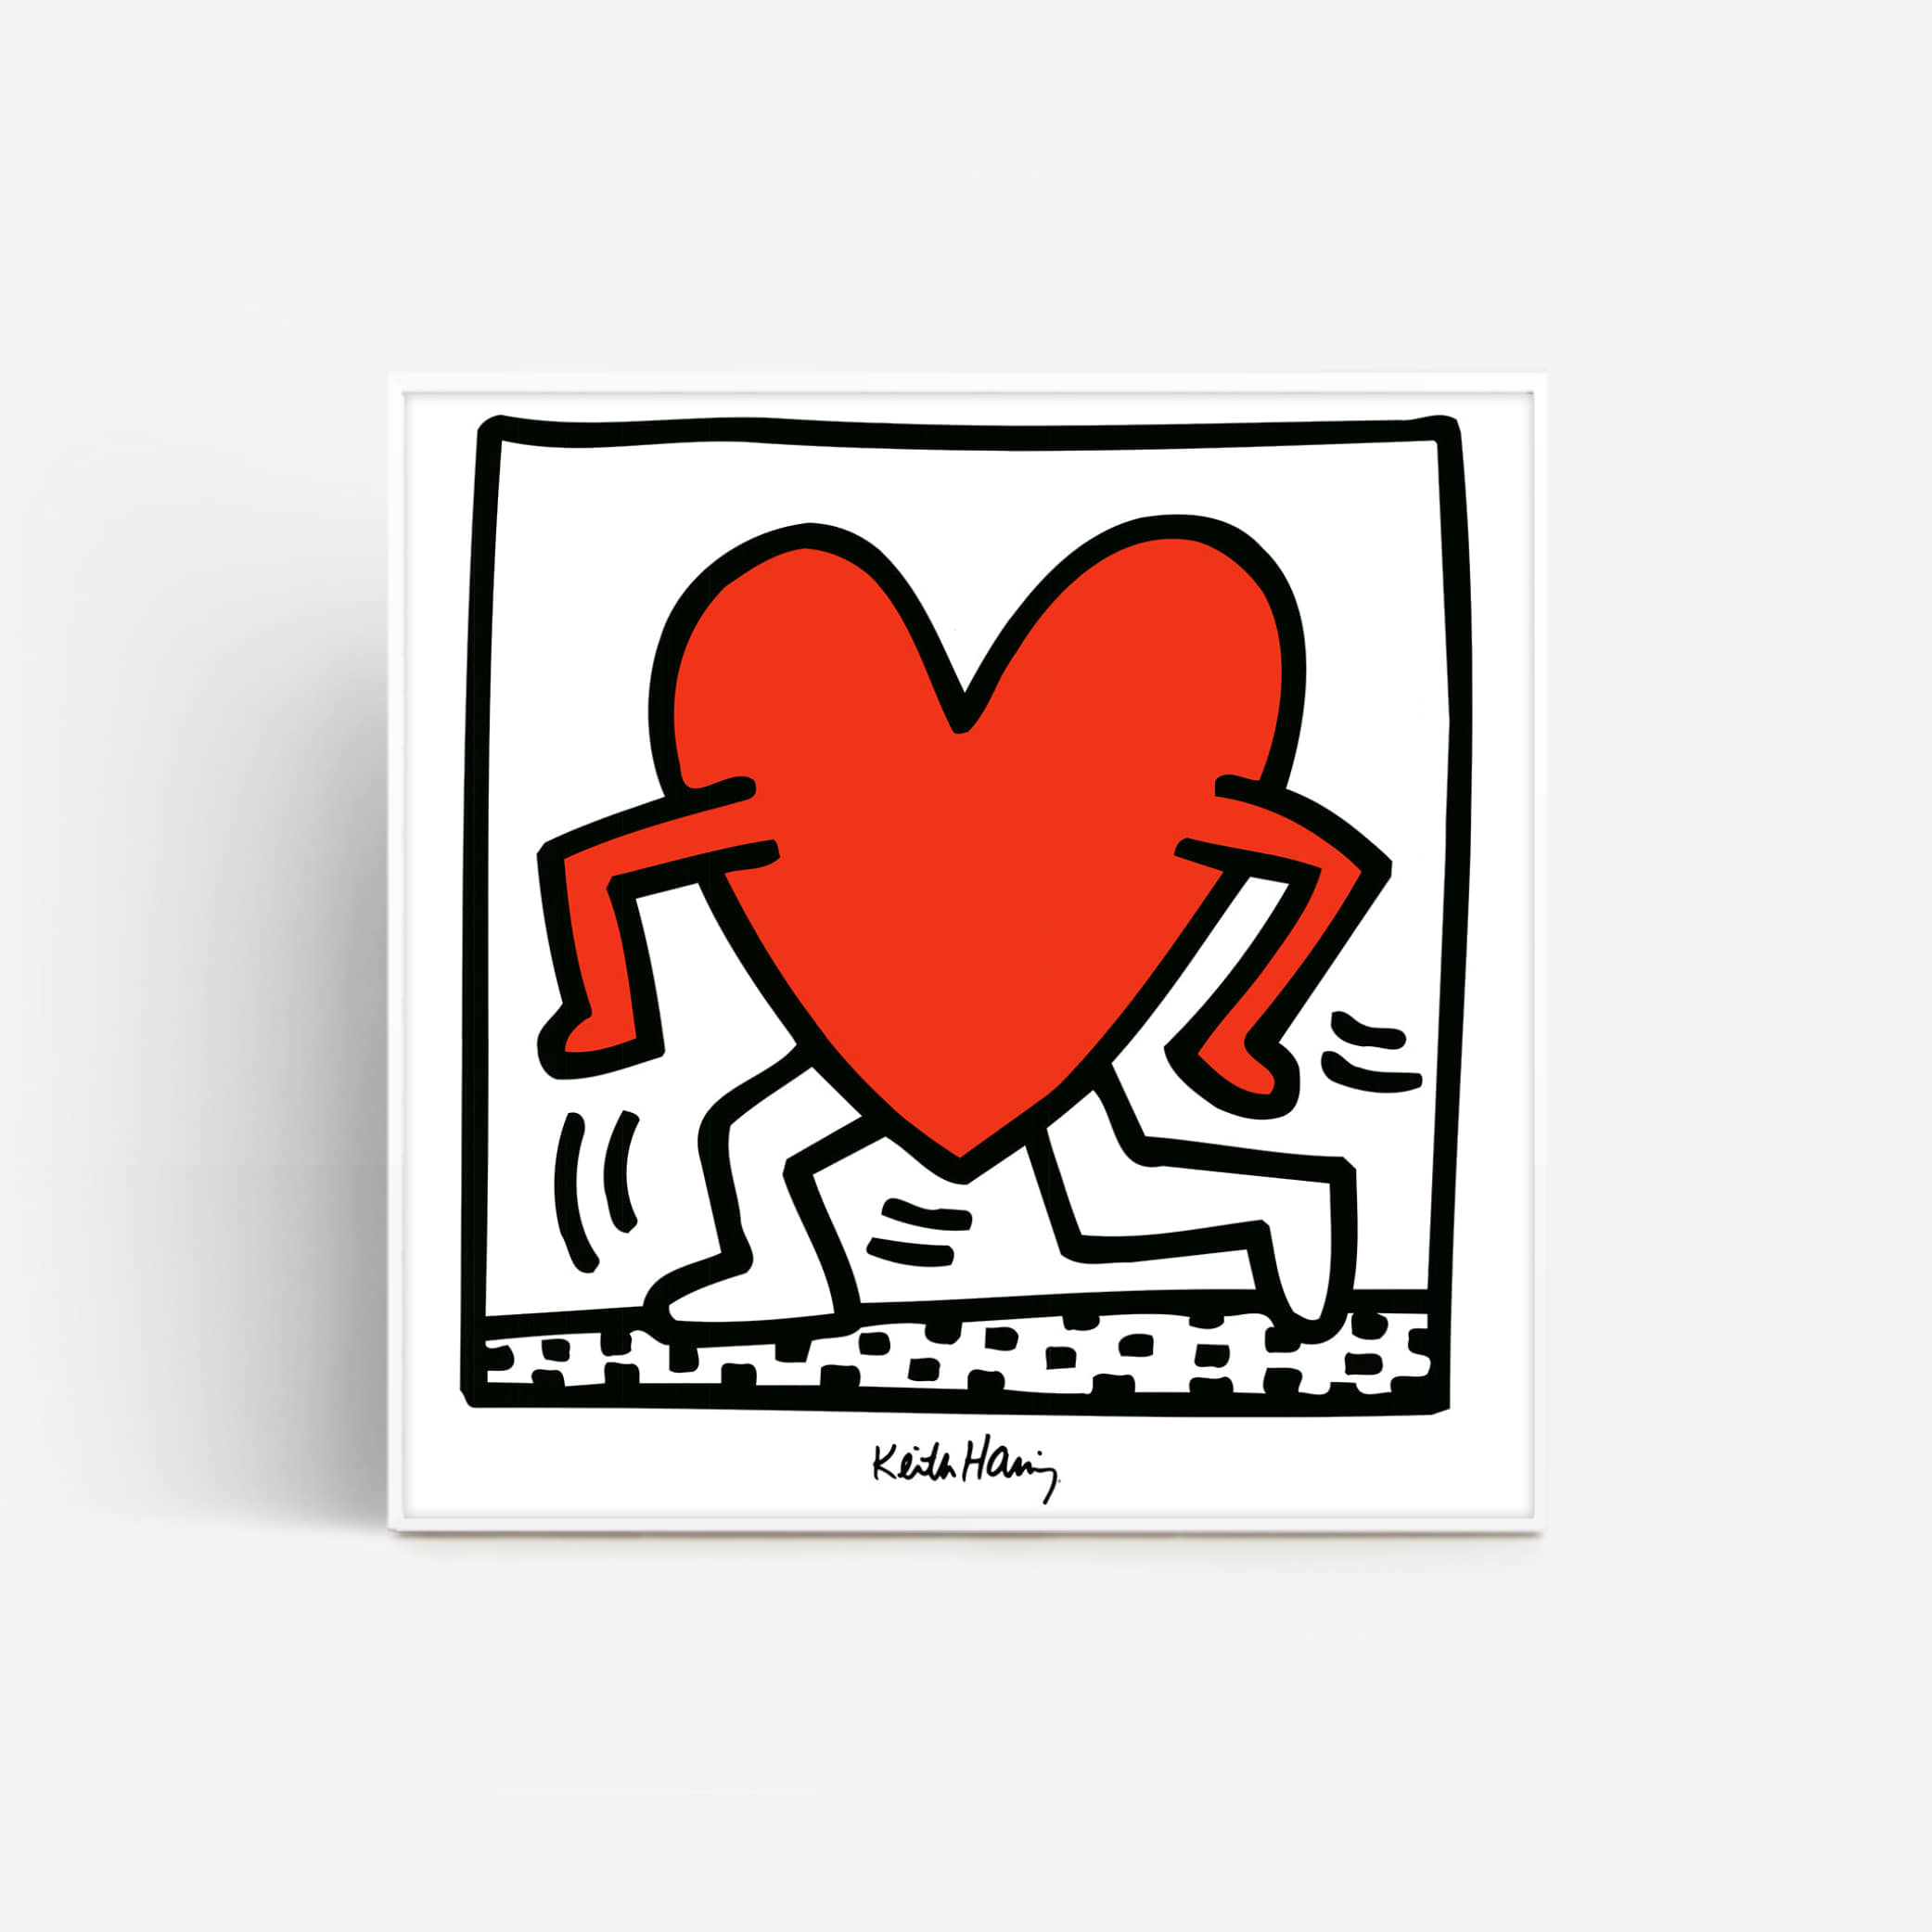 [KEITH HARING] Untitled, 1984